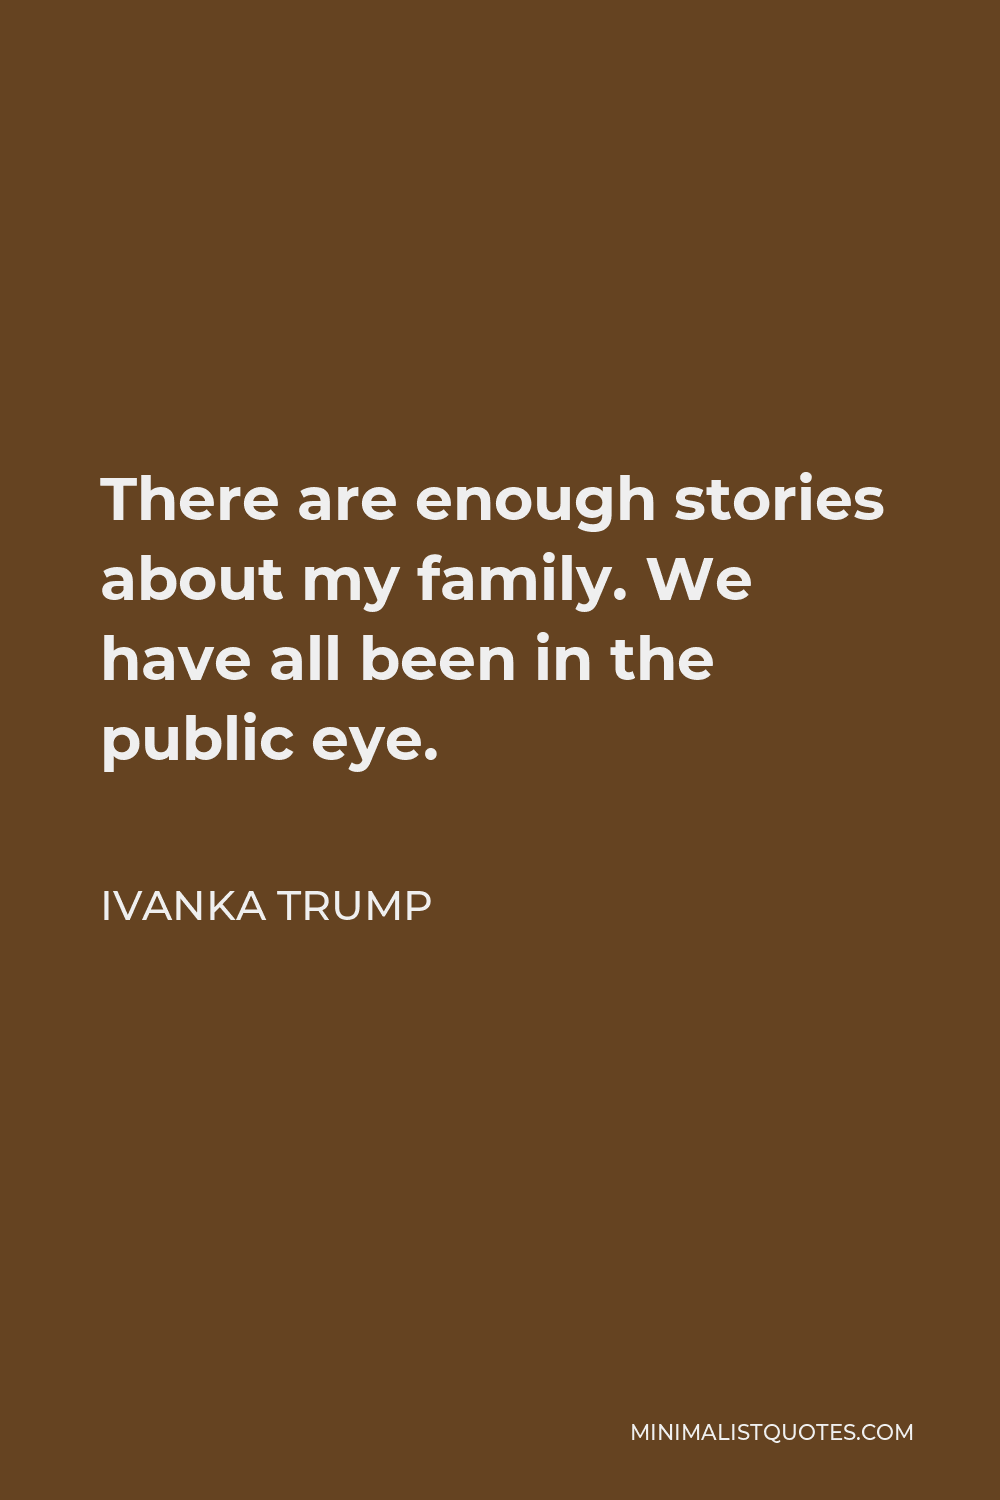 Ivanka Trump Quote - There are enough stories about my family. We have all been in the public eye.